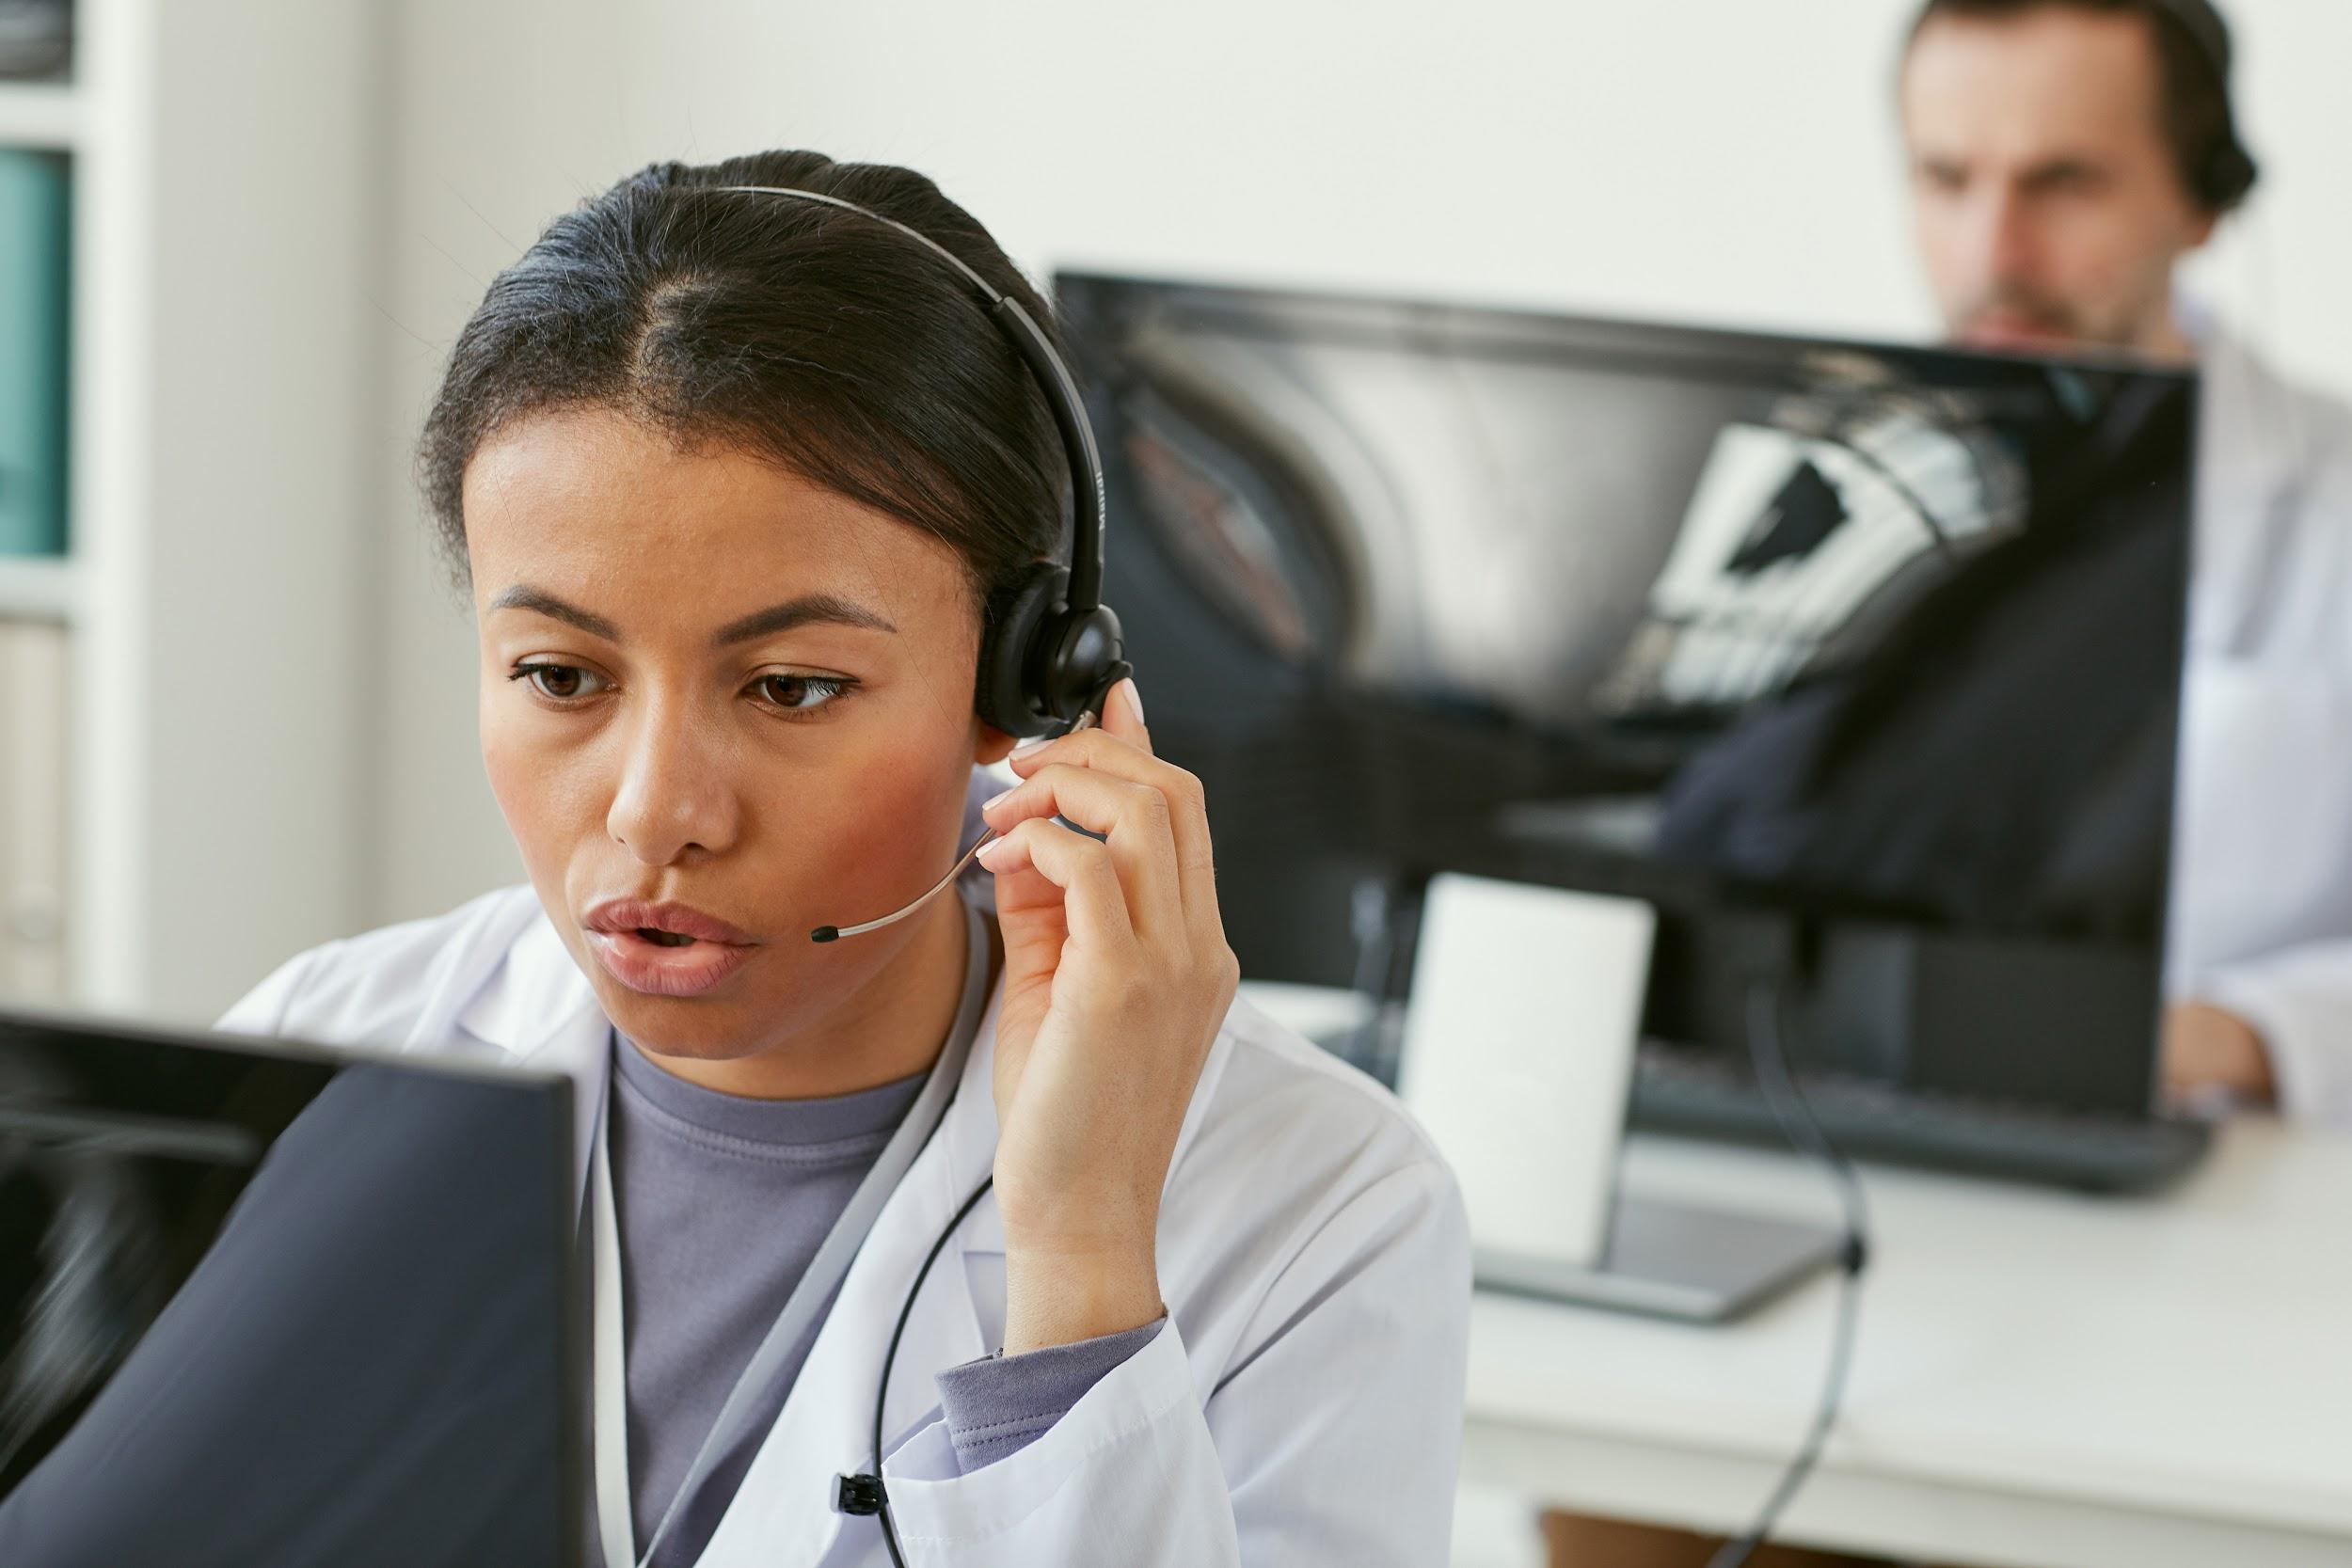 Young woman wearing headphones working on computer she answering on phone calls